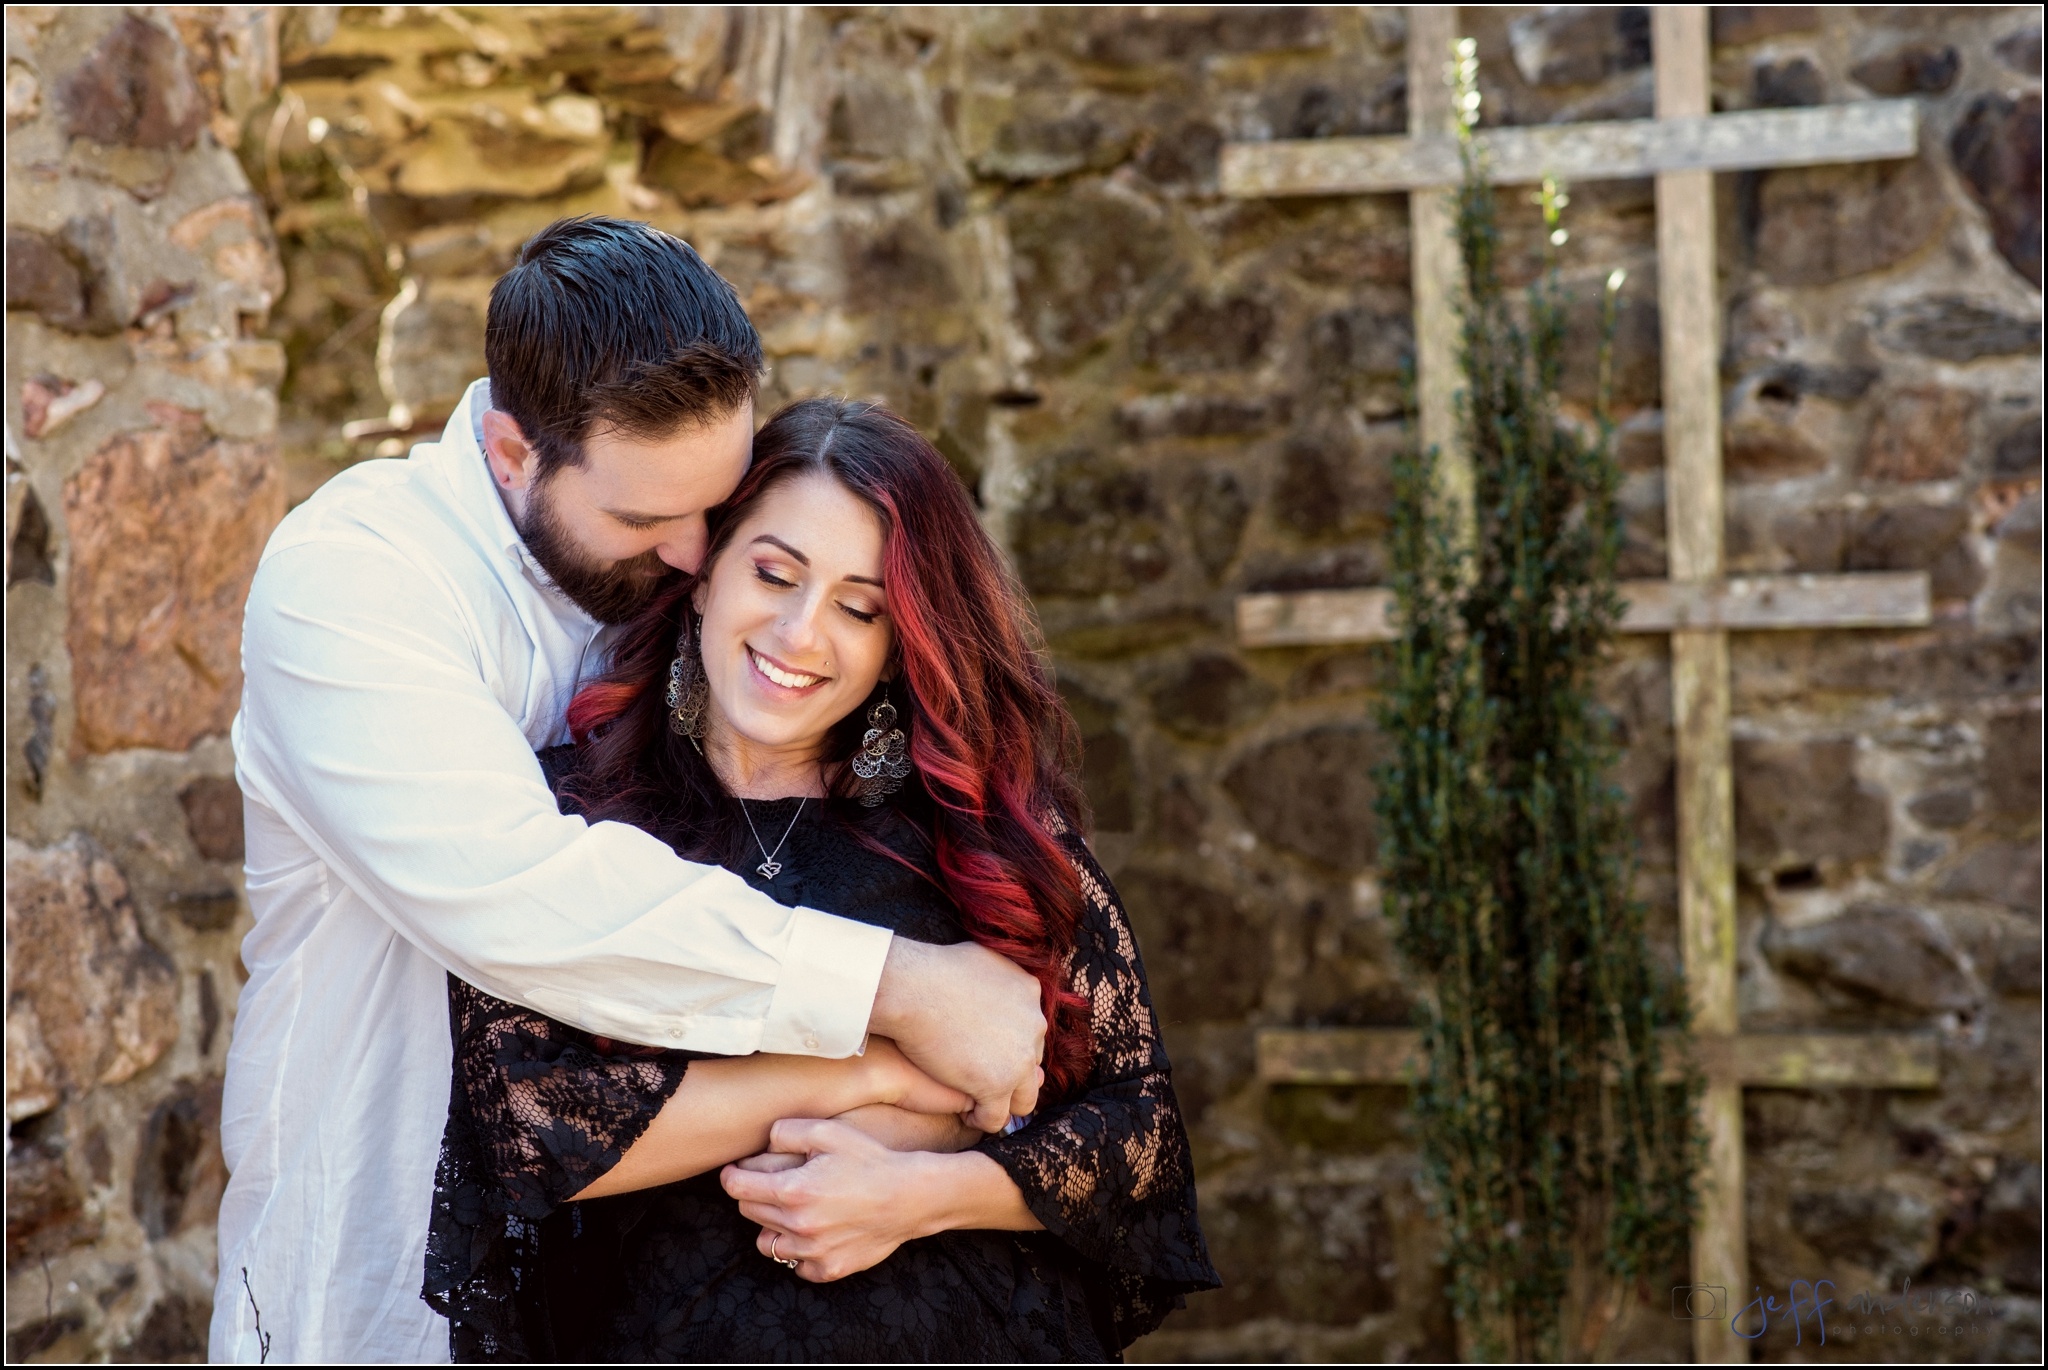 Media PA photographer,delaware county photographer,engagement session,jeff anderson photography,macey & andrew,ridley creek state park,ridley creek state park mansion,